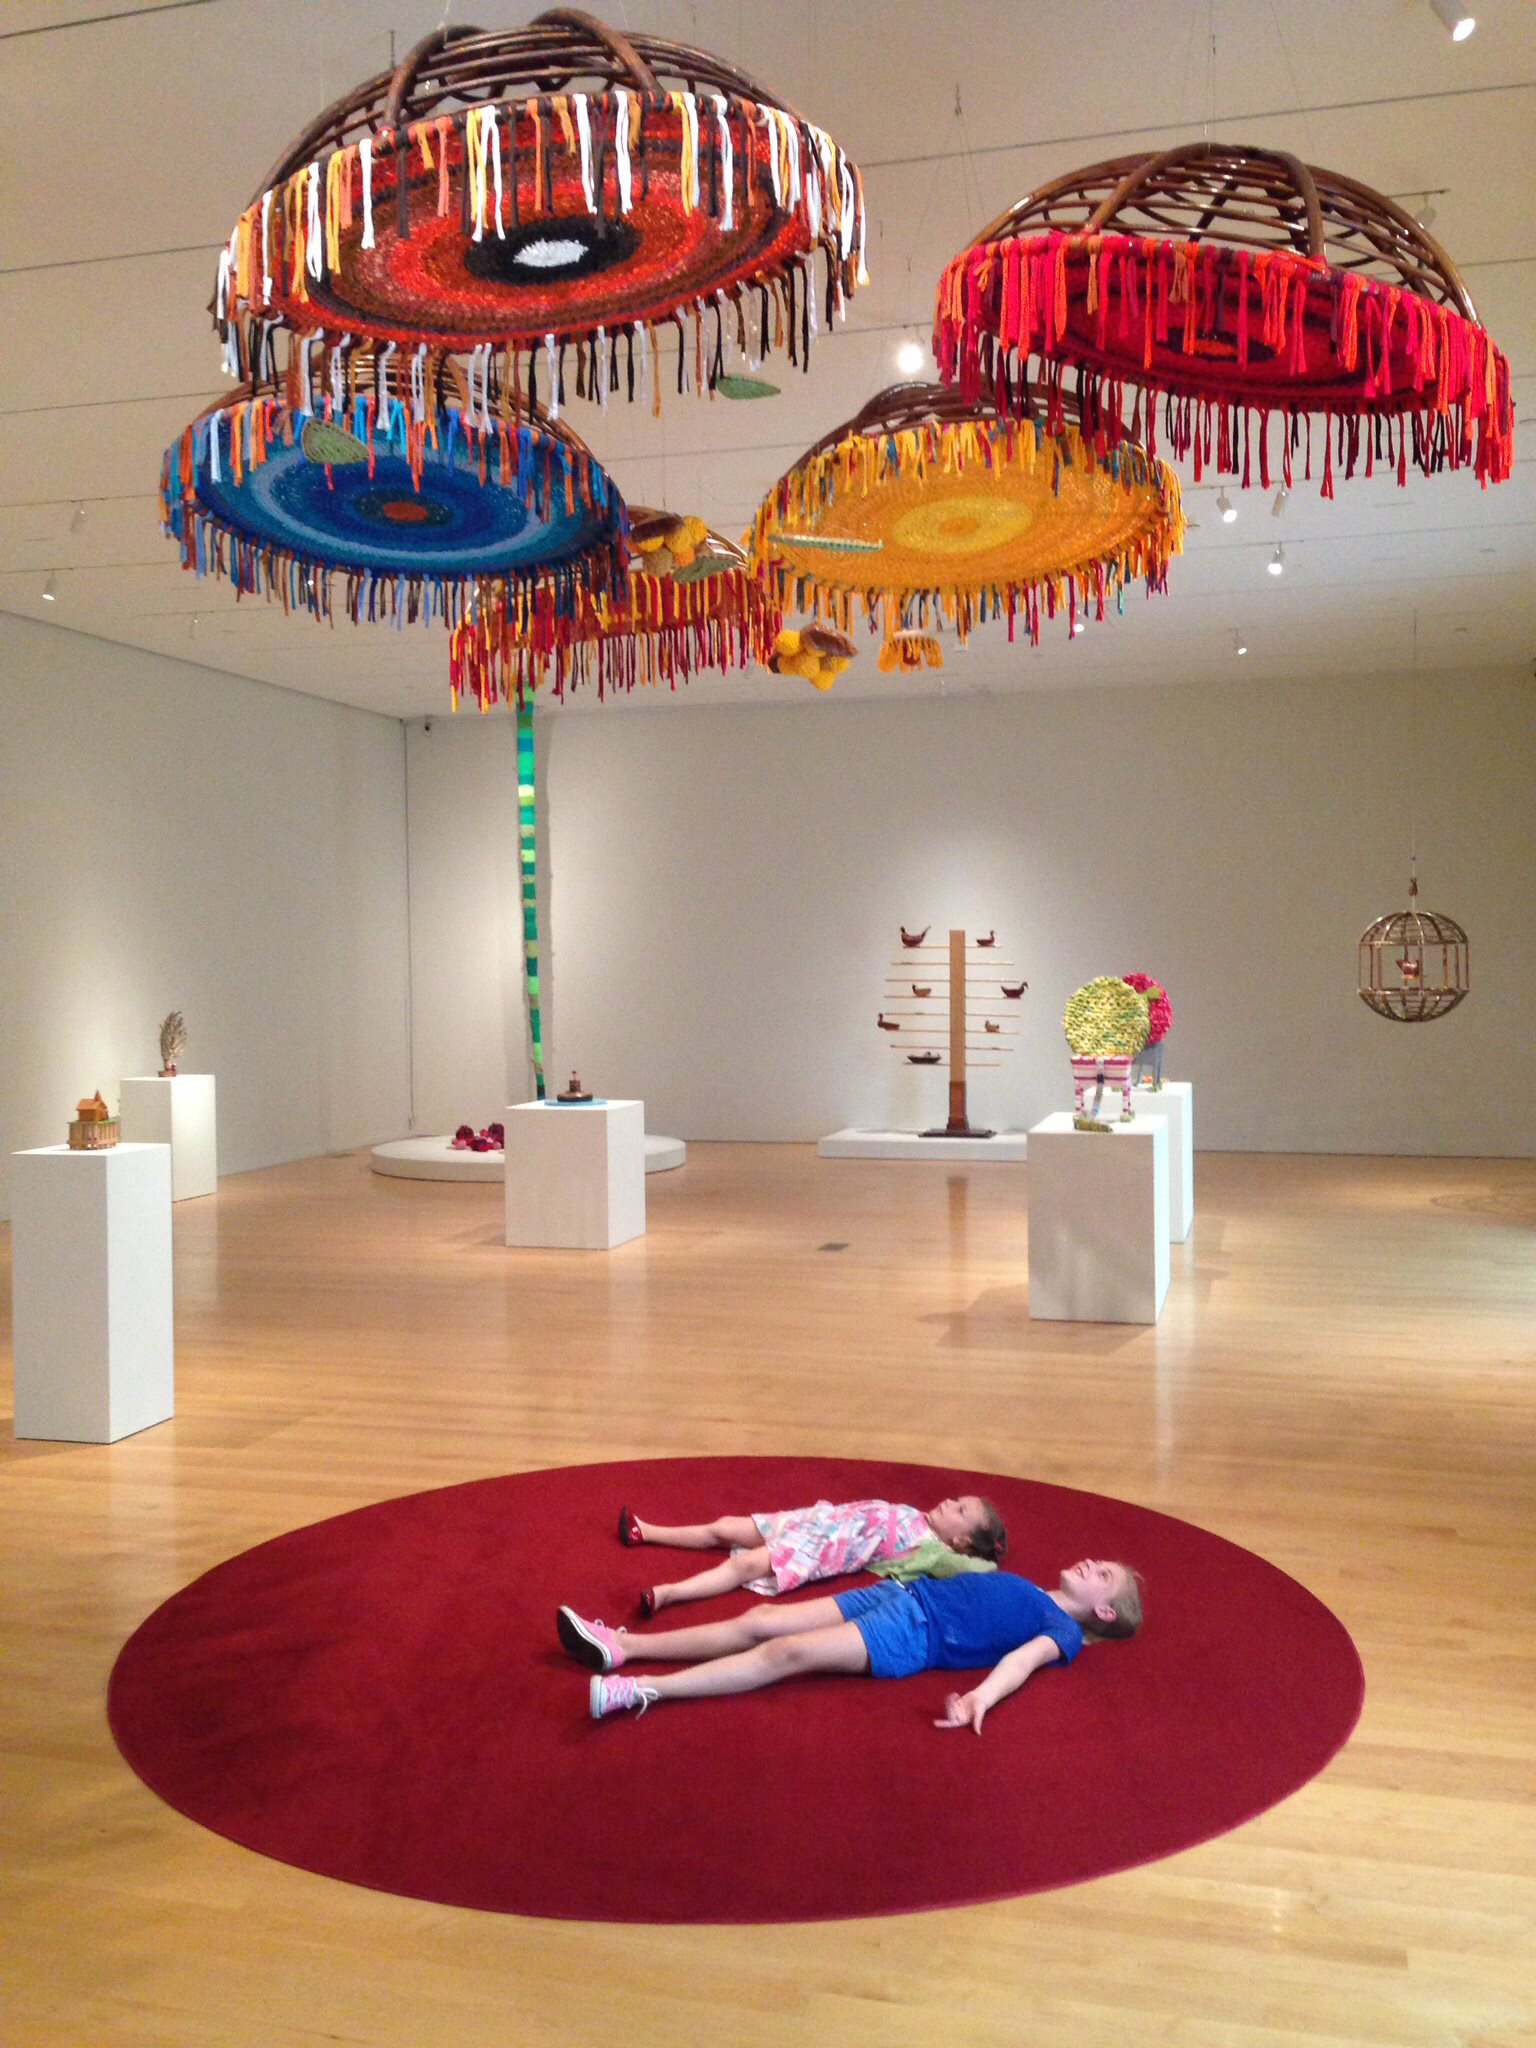   From Seeds To Seeds  Installation view Reclaimed wood and textiles Philadelphia Museum of Art 2015 